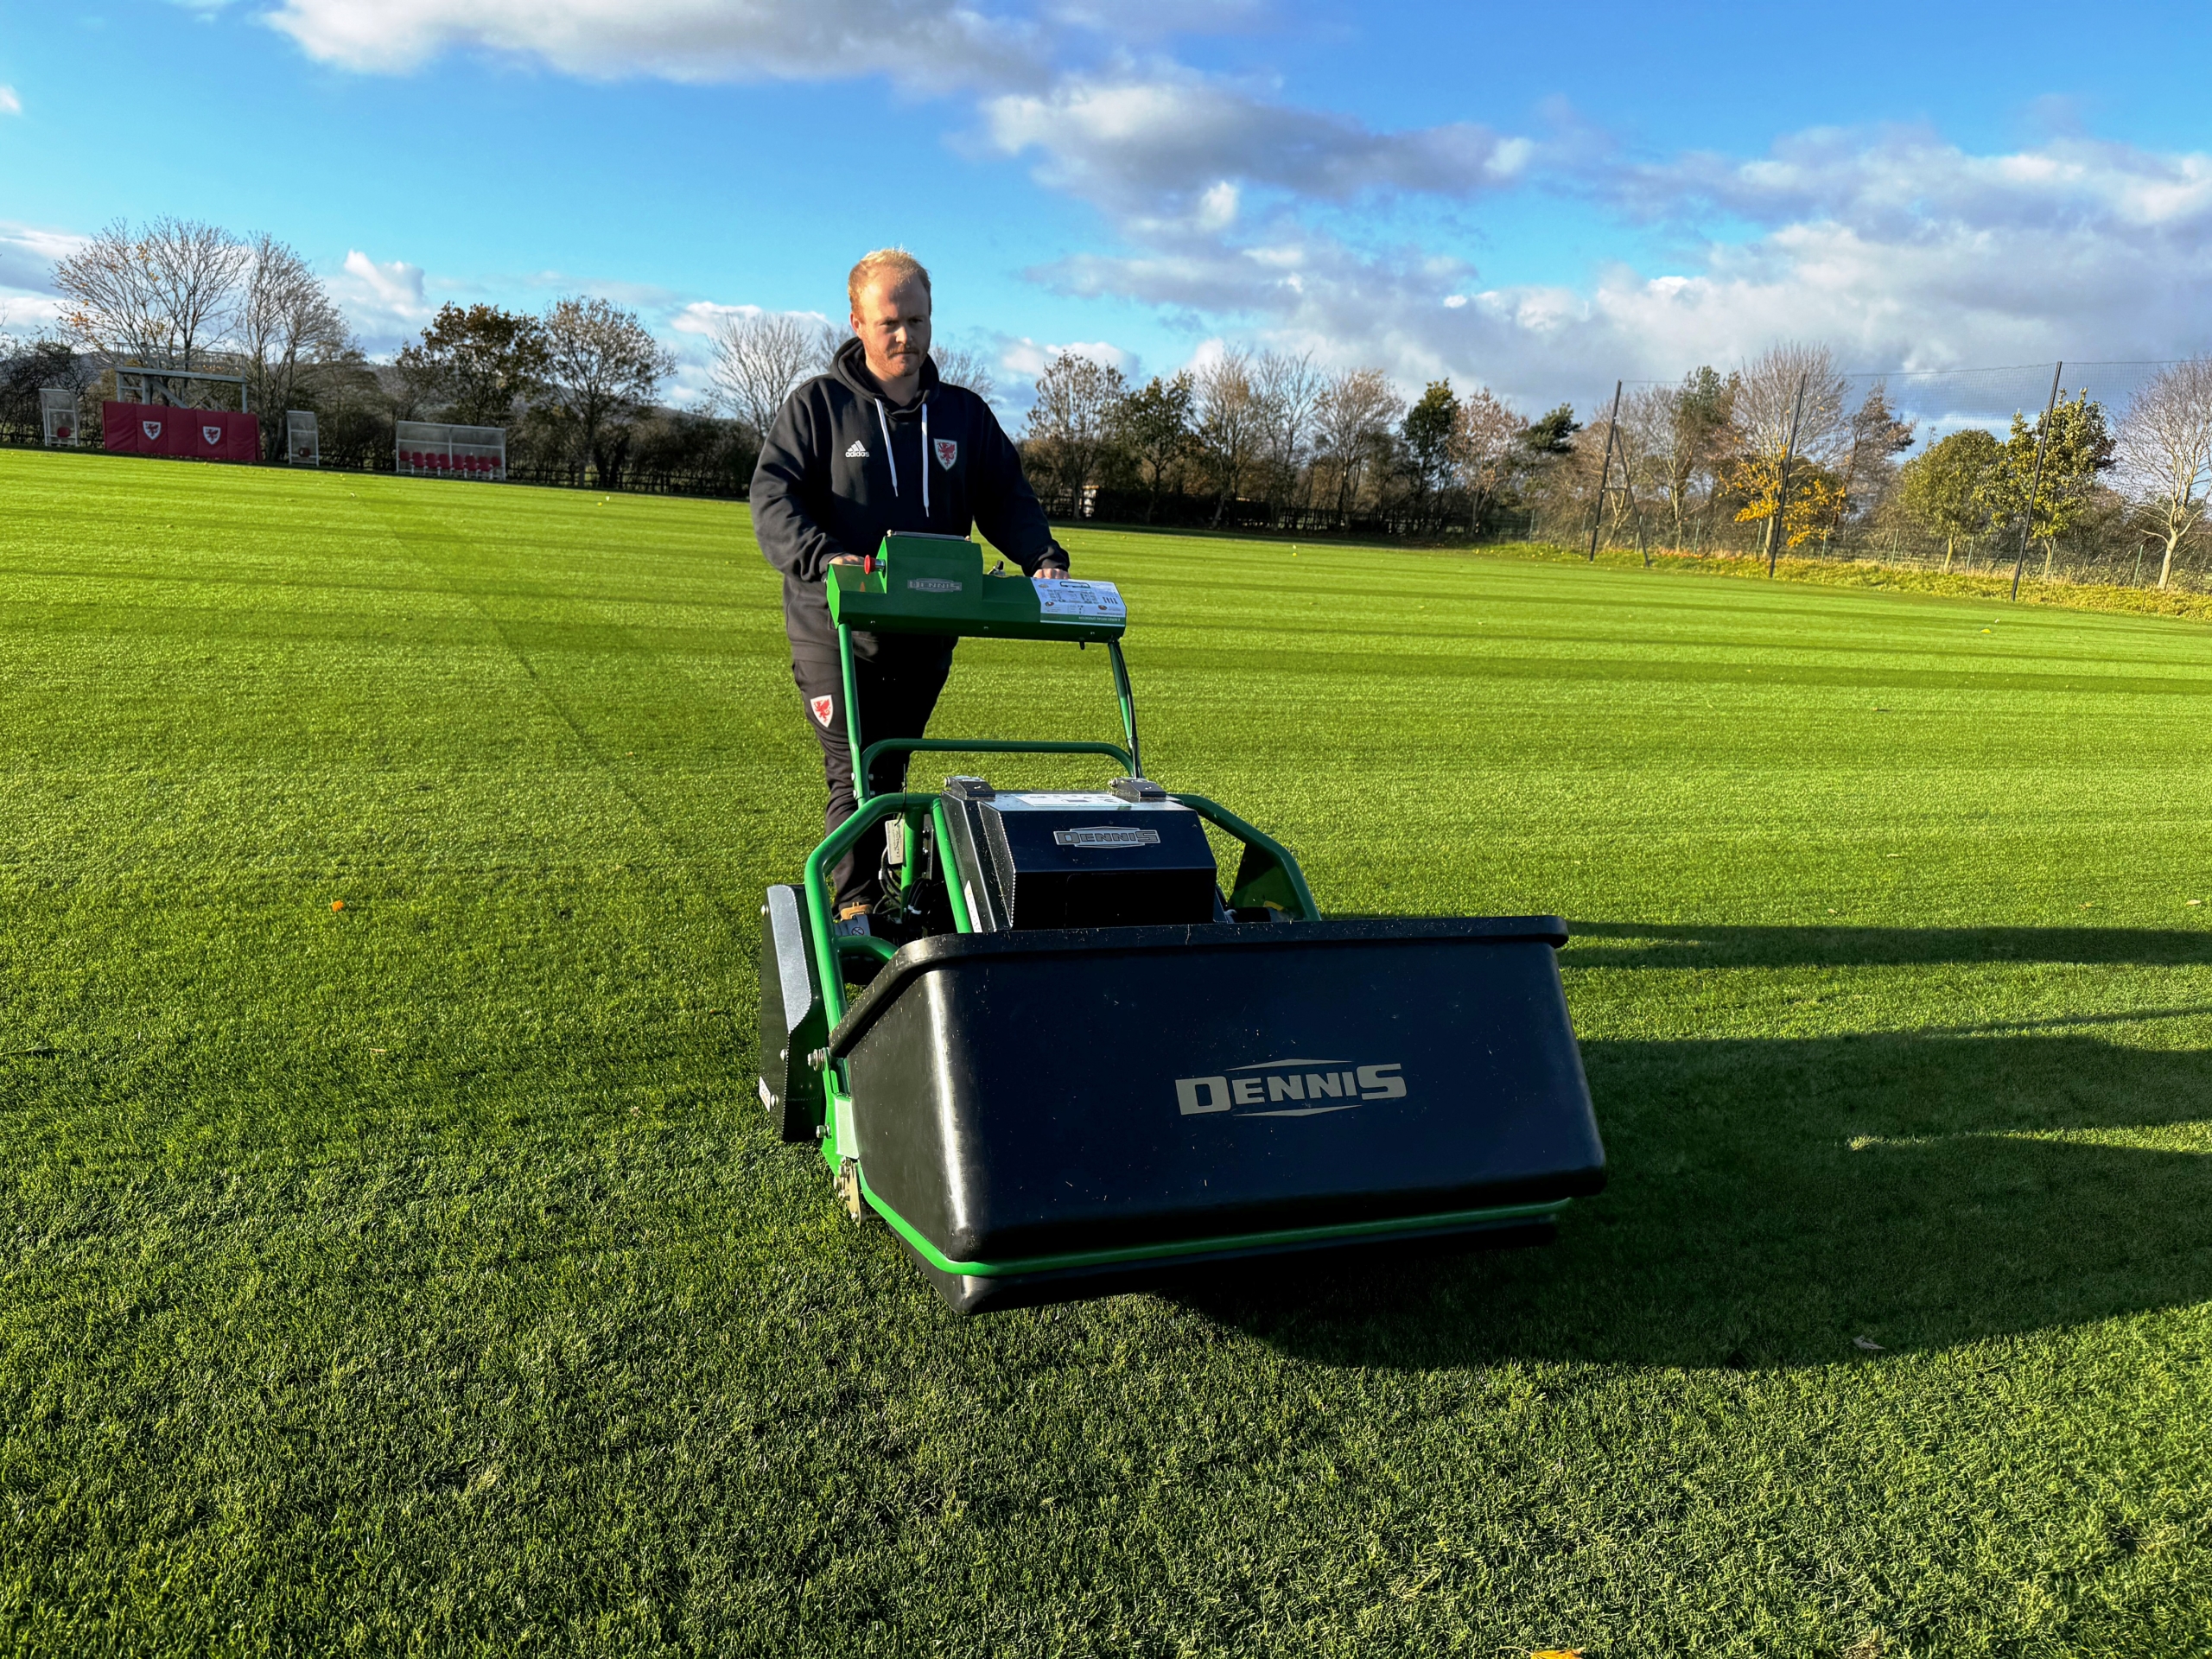 Dennis gives Colliers Park the cutting edge